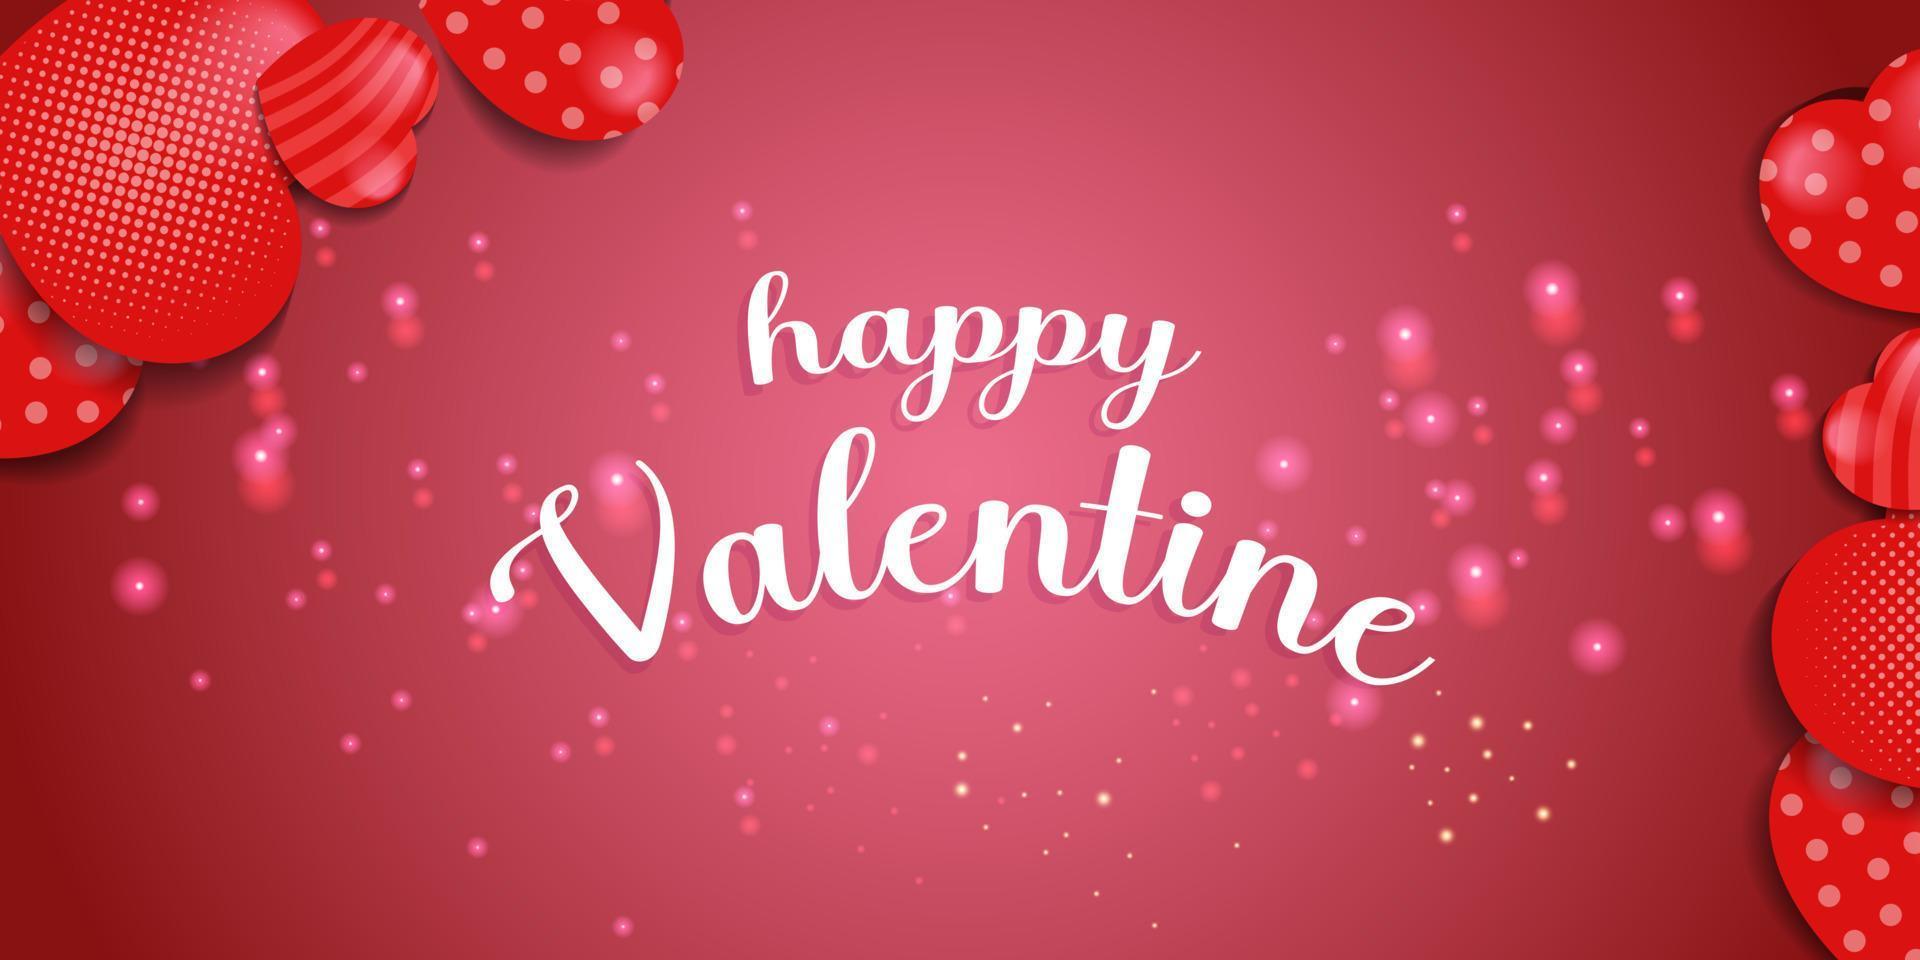 valentine background with red heart shape vector